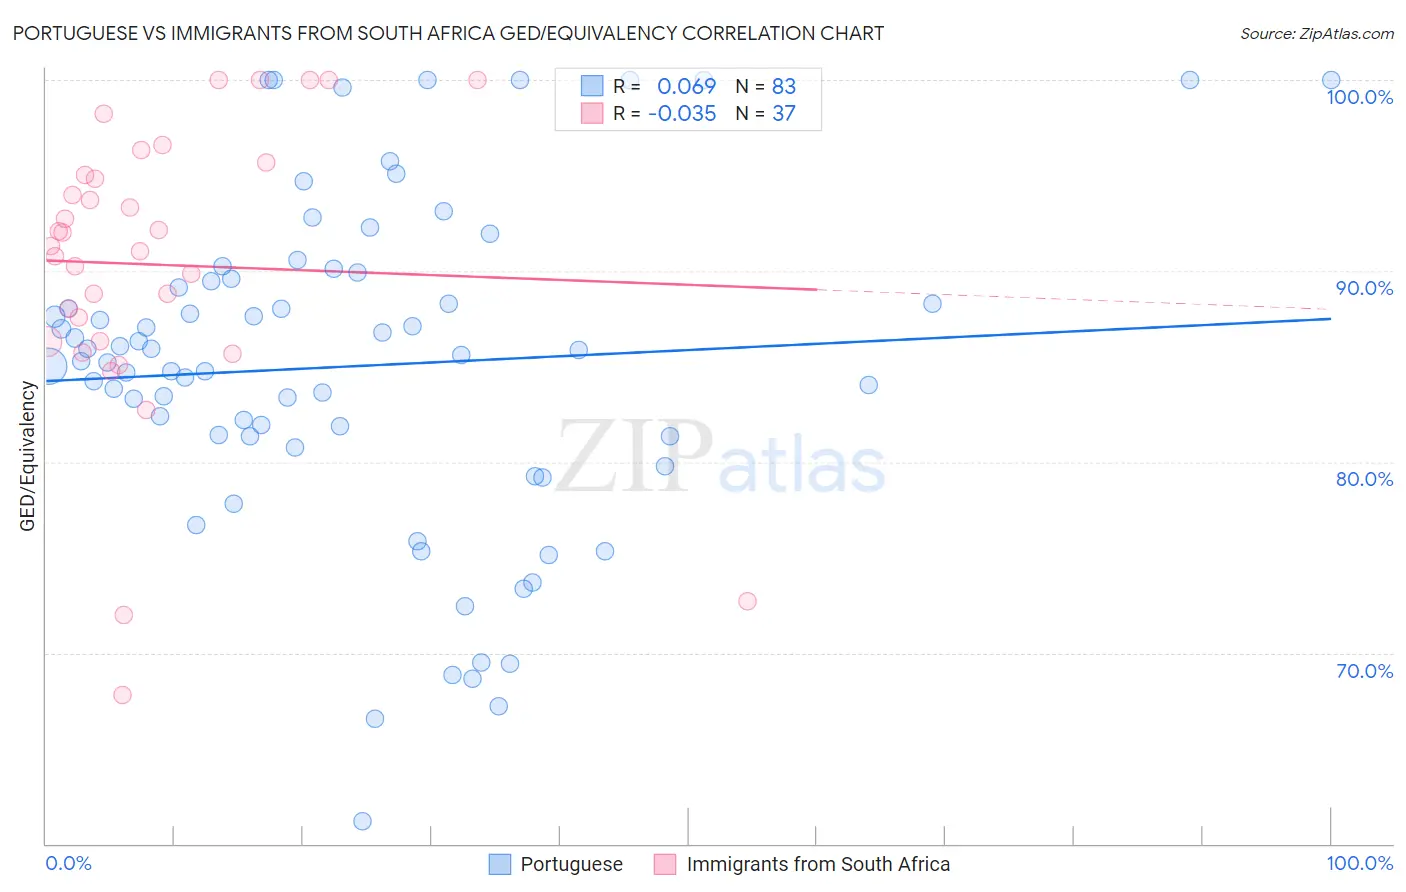 Portuguese vs Immigrants from South Africa GED/Equivalency